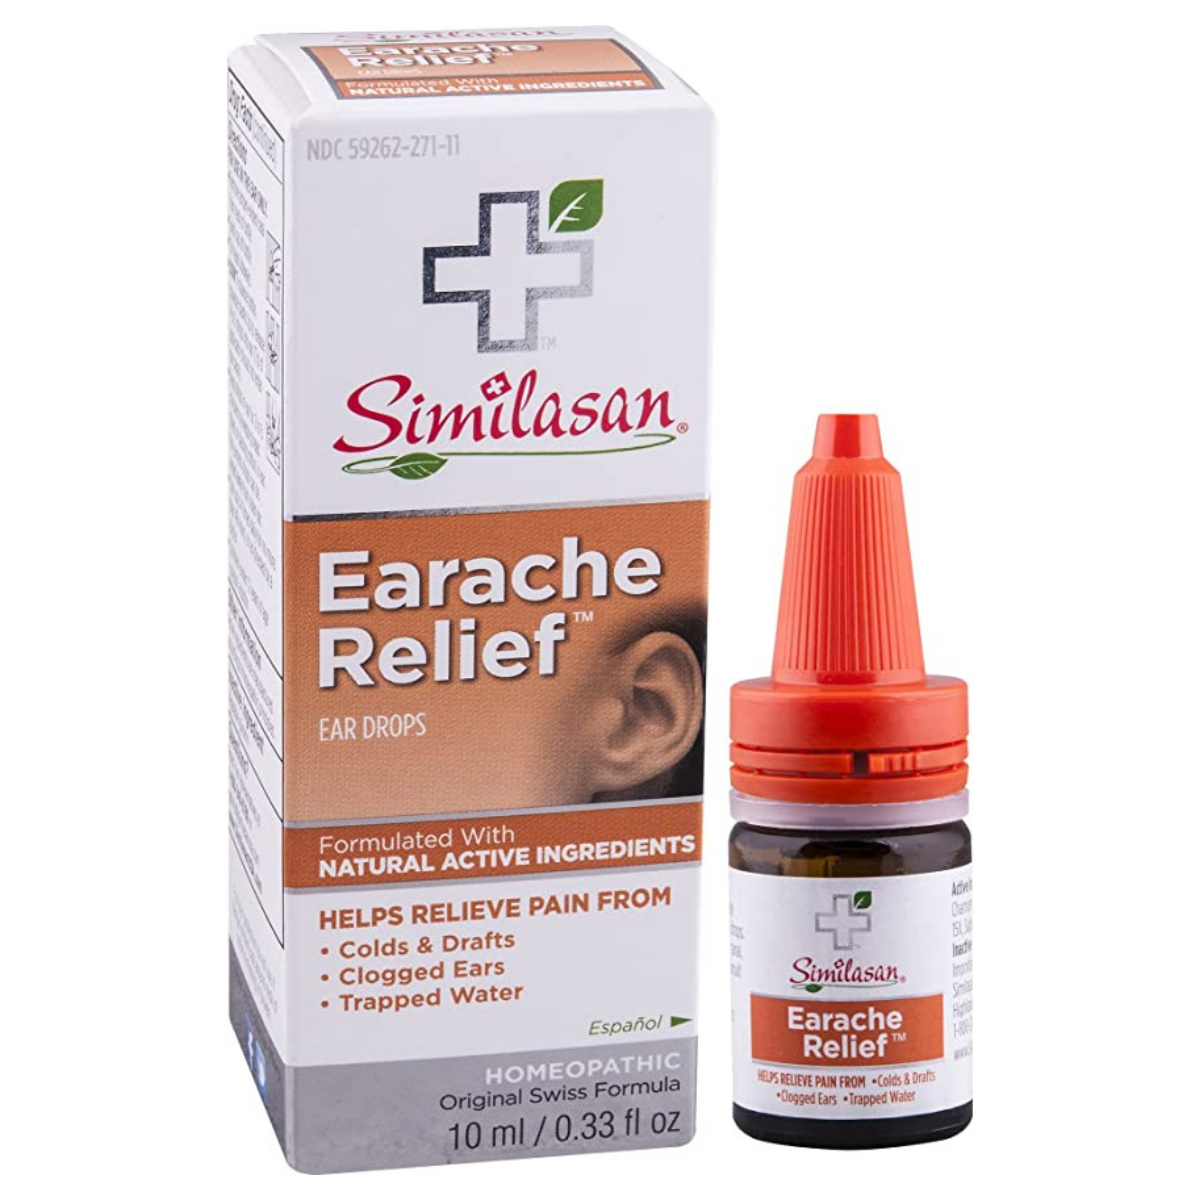 Primary image of Similasan Earache Relief